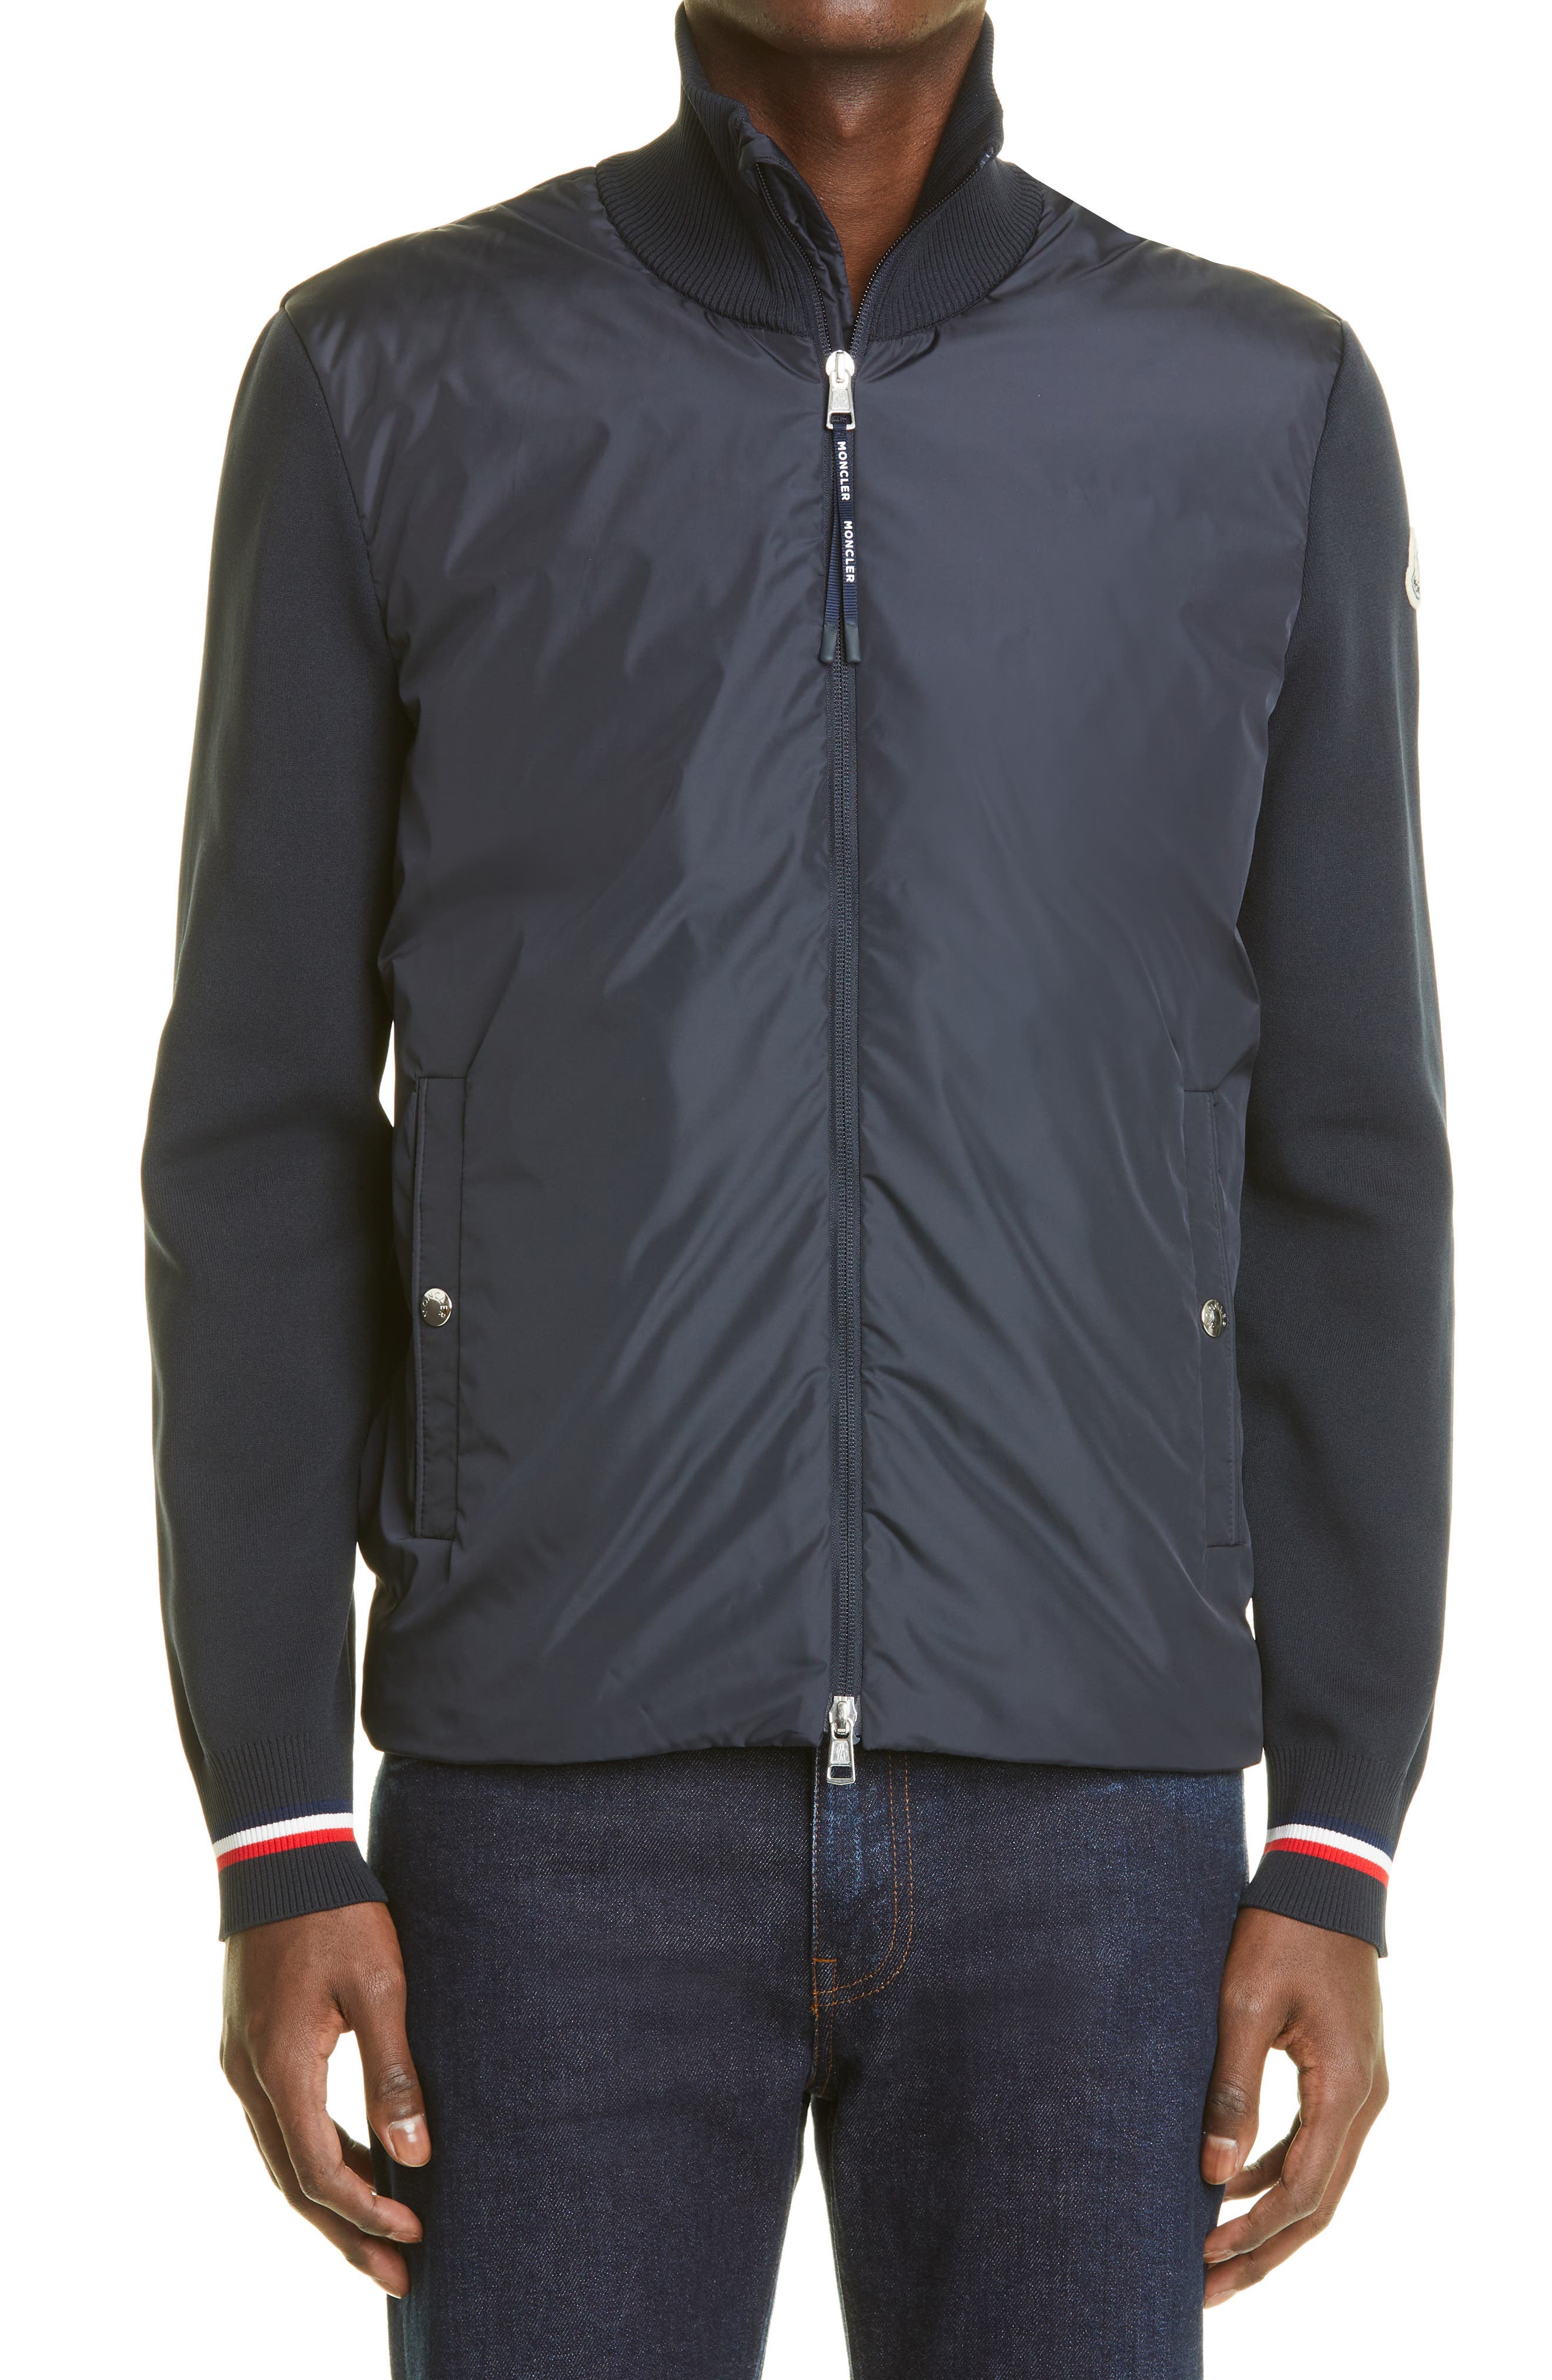 Moncler Men's Tricolor Knit Sleeve Jacket in Navy at Nordstrom, Size Xxx-Large